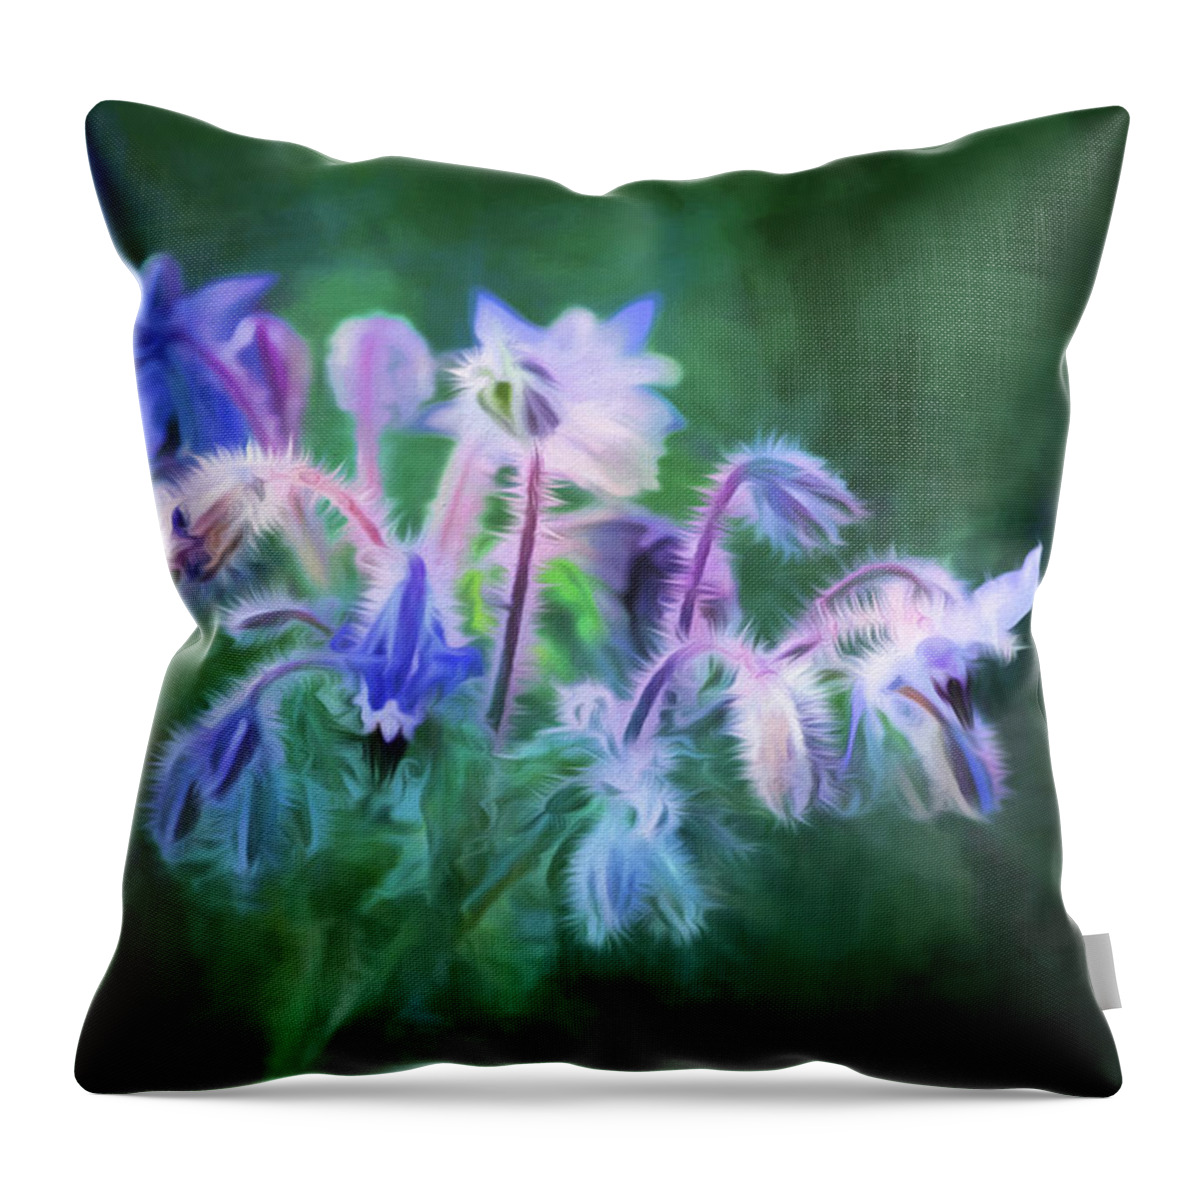 Digital Painting Throw Pillow featuring the painting Purple Borage by Bonnie Bruno